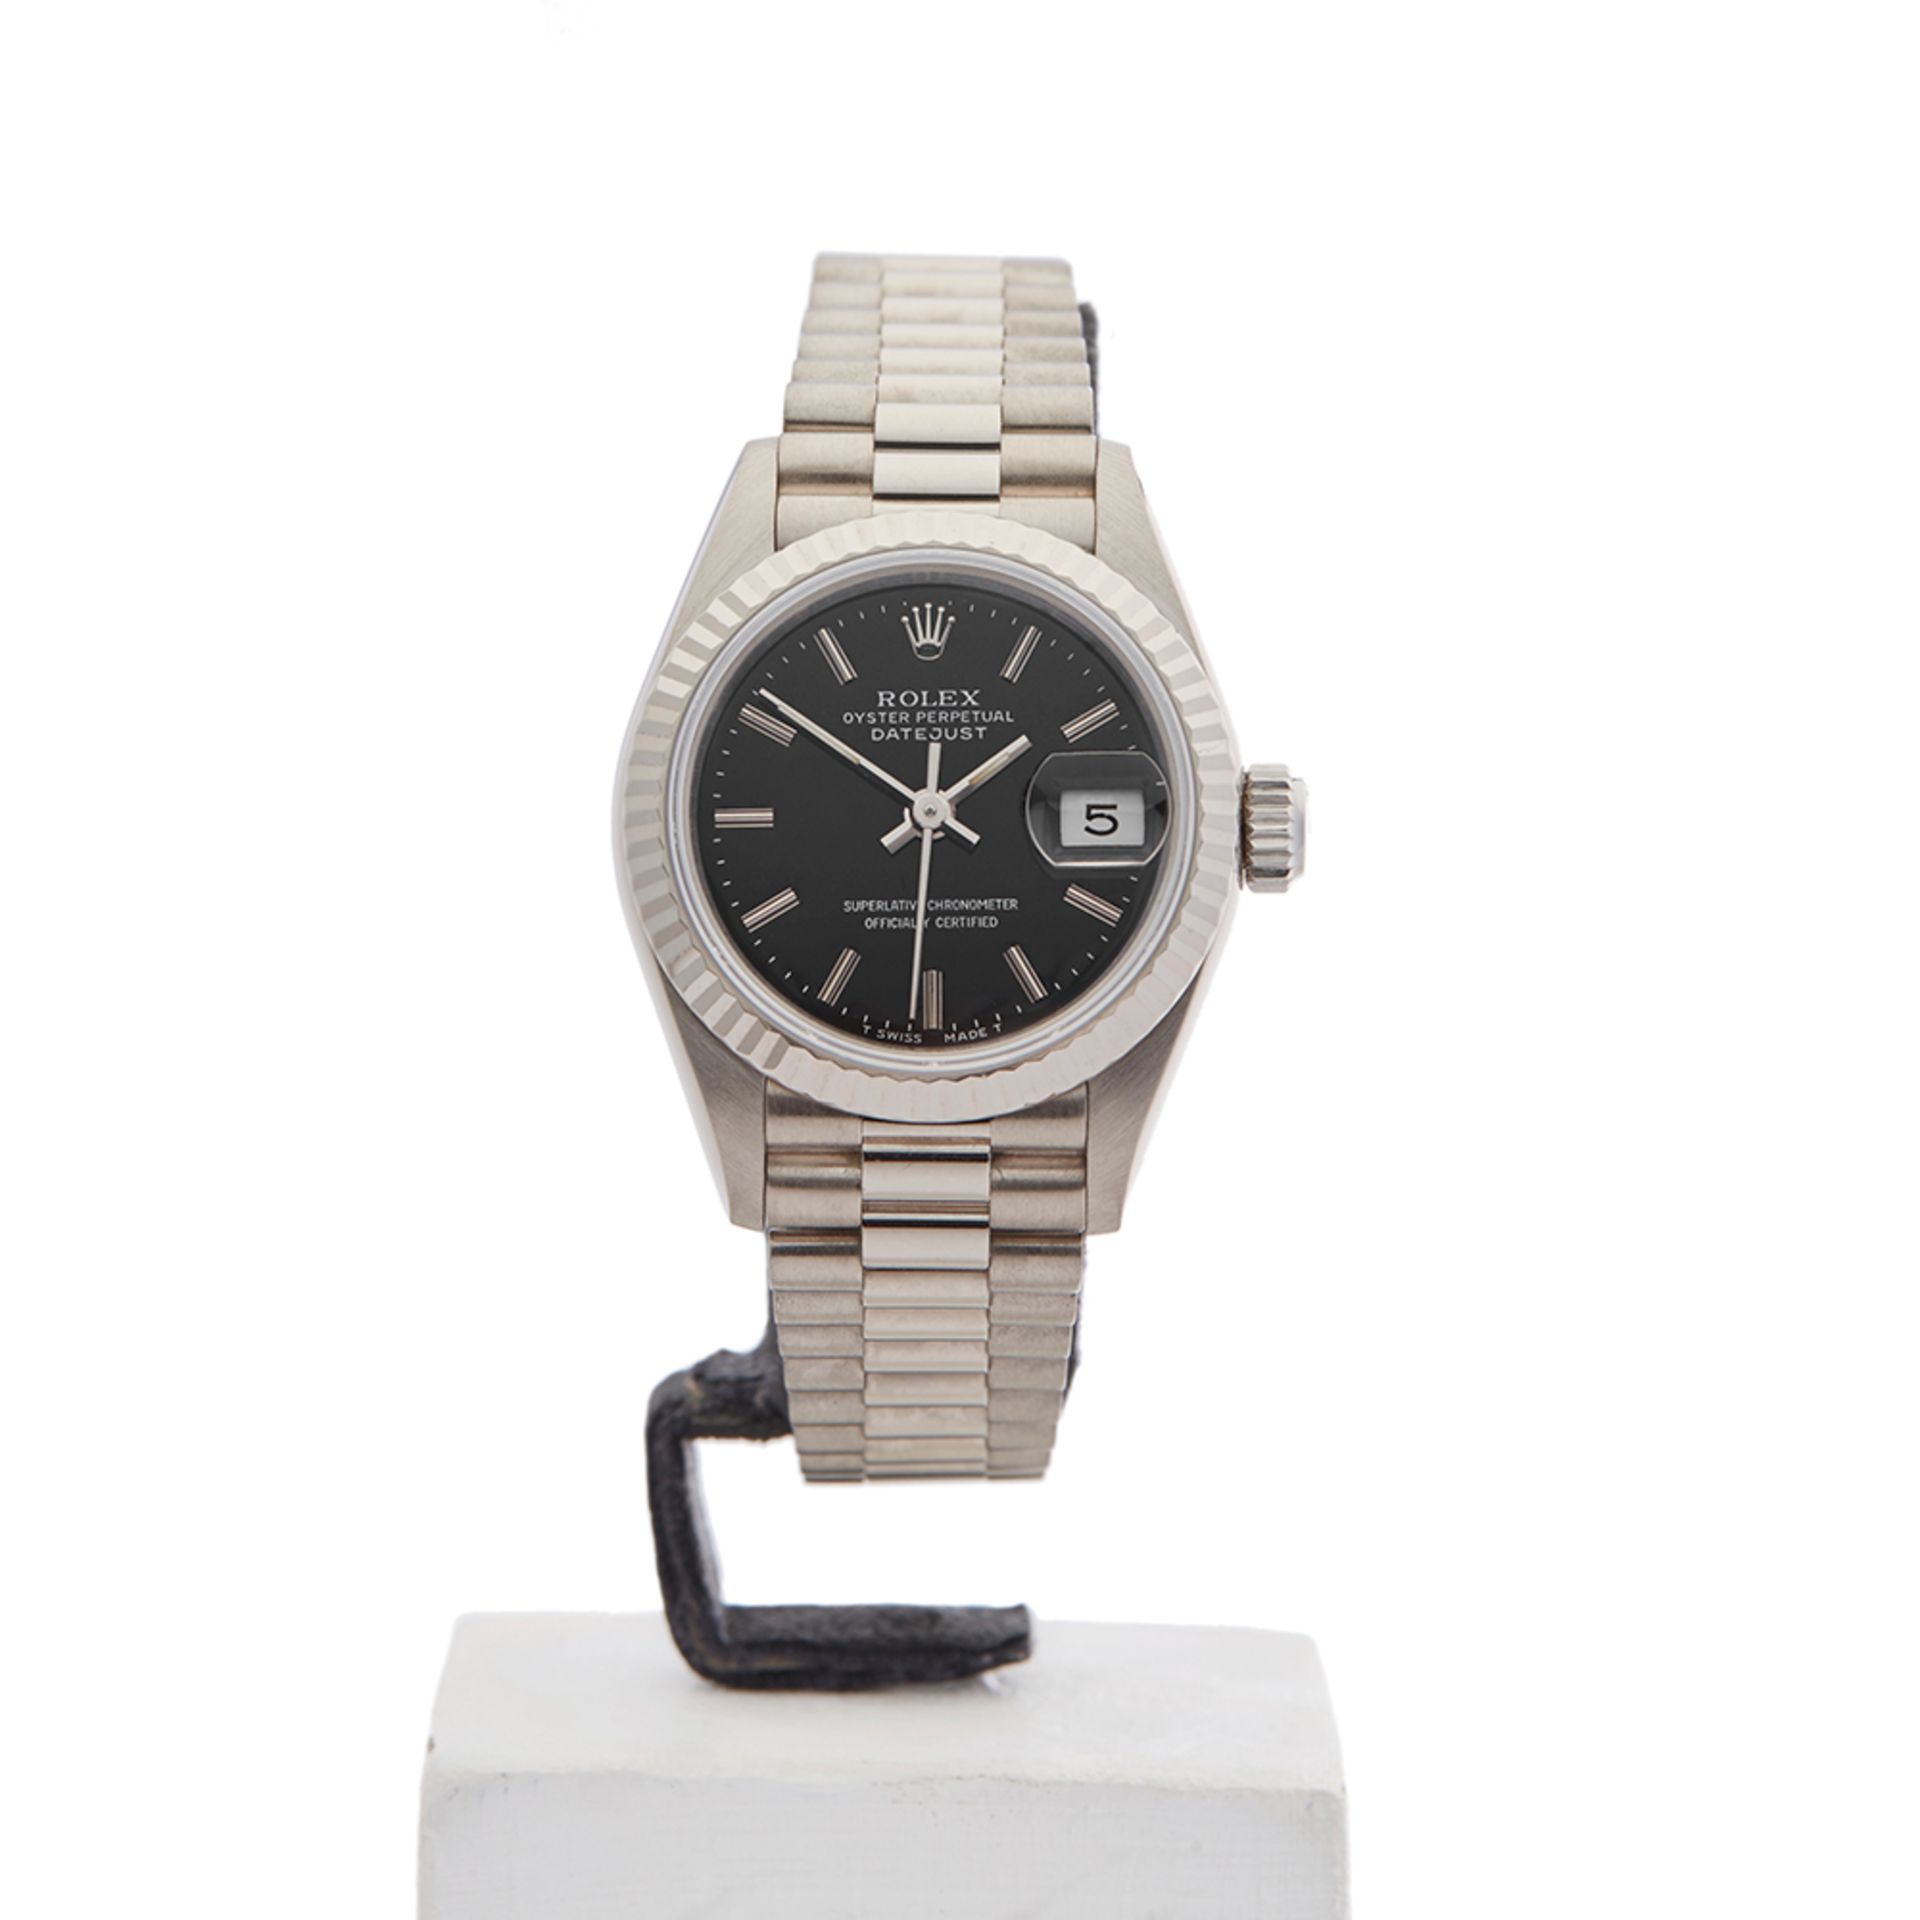 Datejust 26mm 18k White Gold 69179 - Image 2 of 9